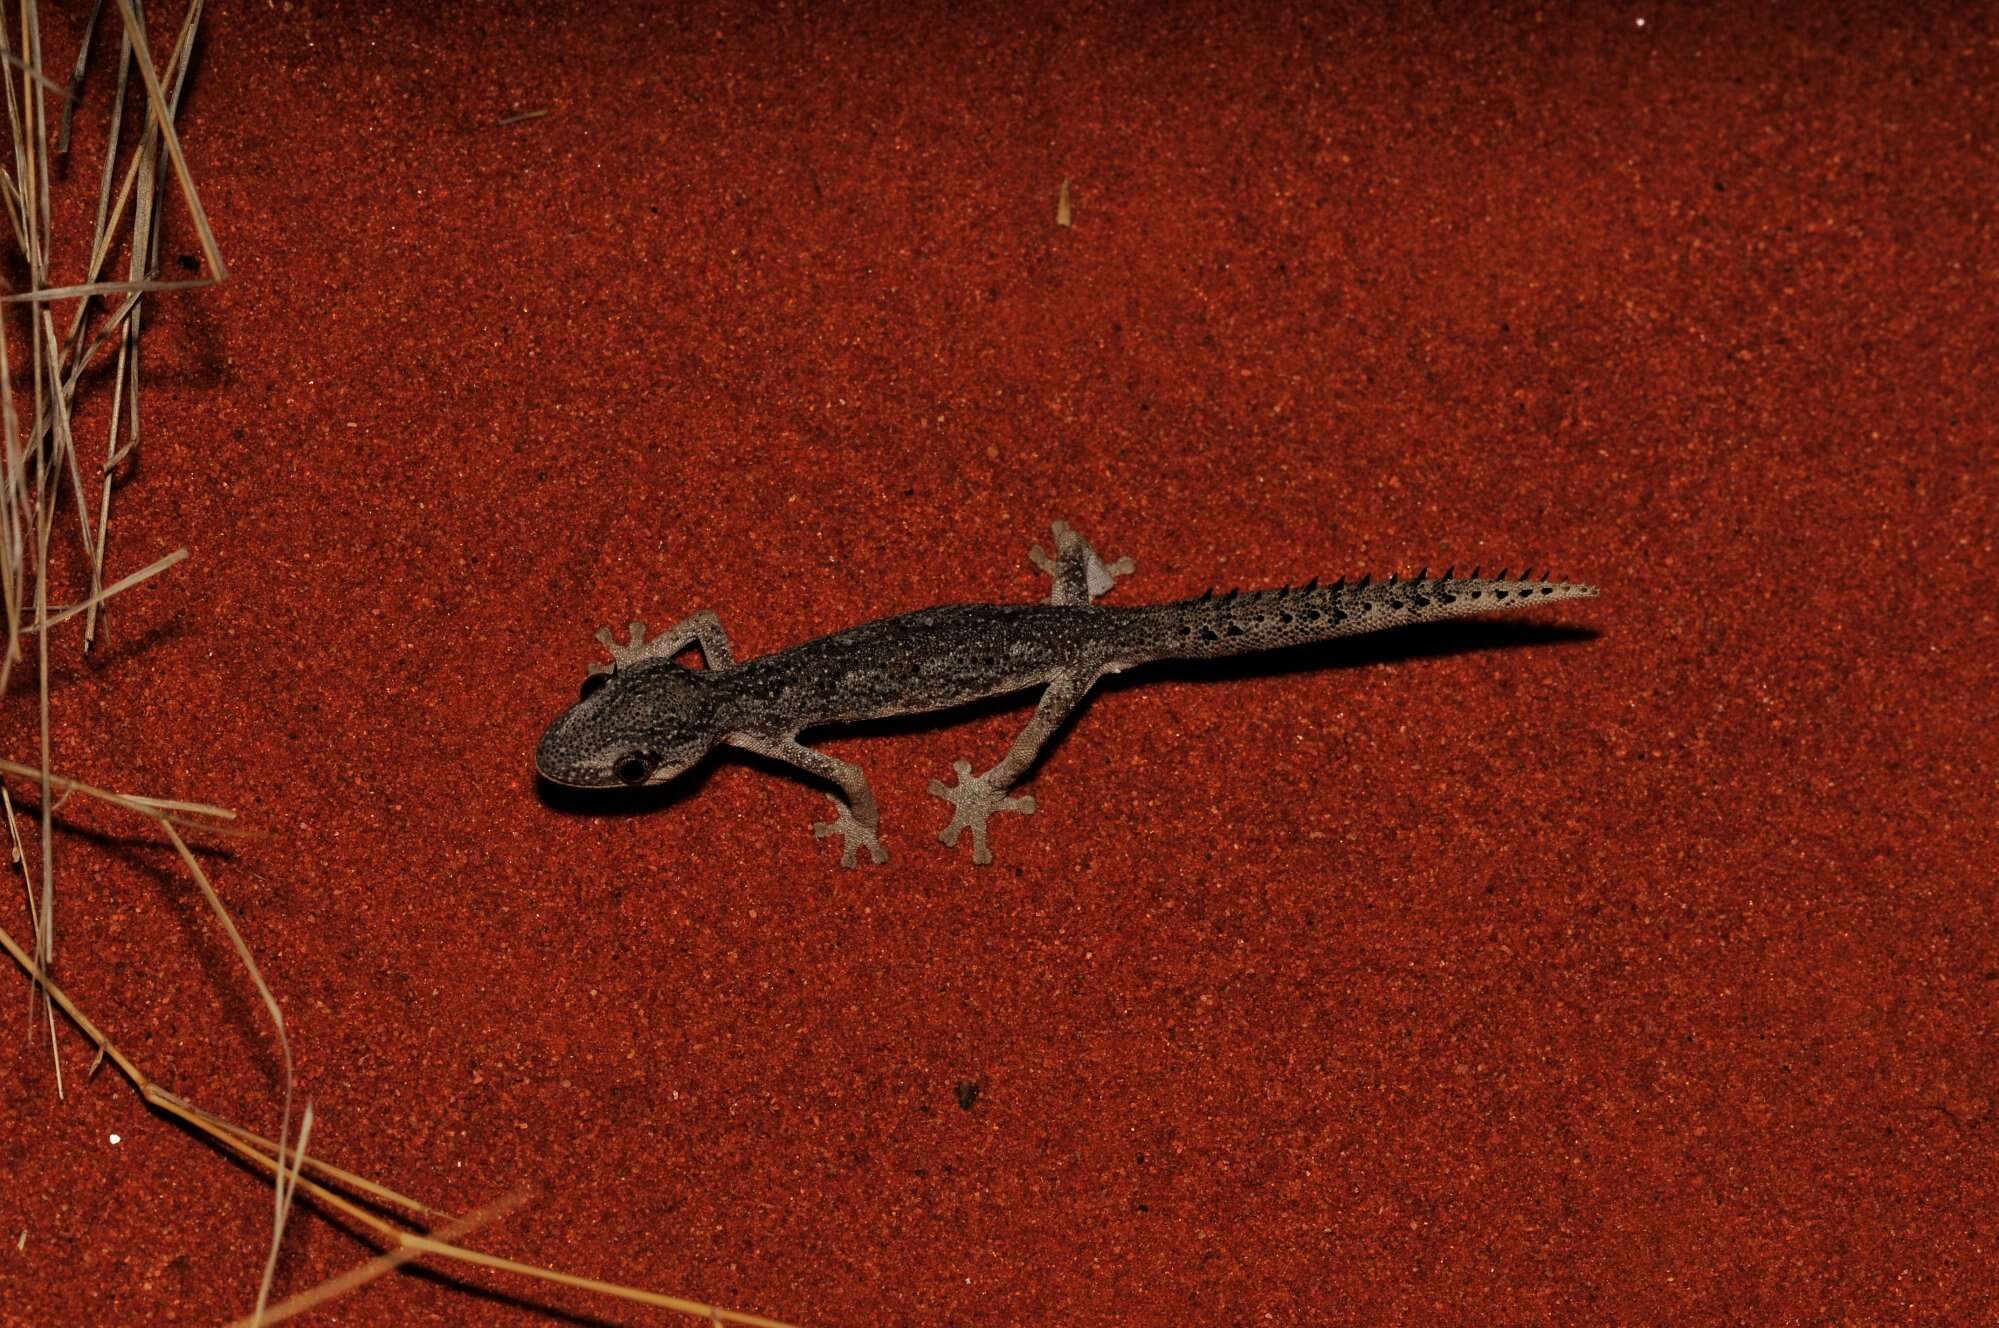 Image of Northern Spiny-tailed Gecko